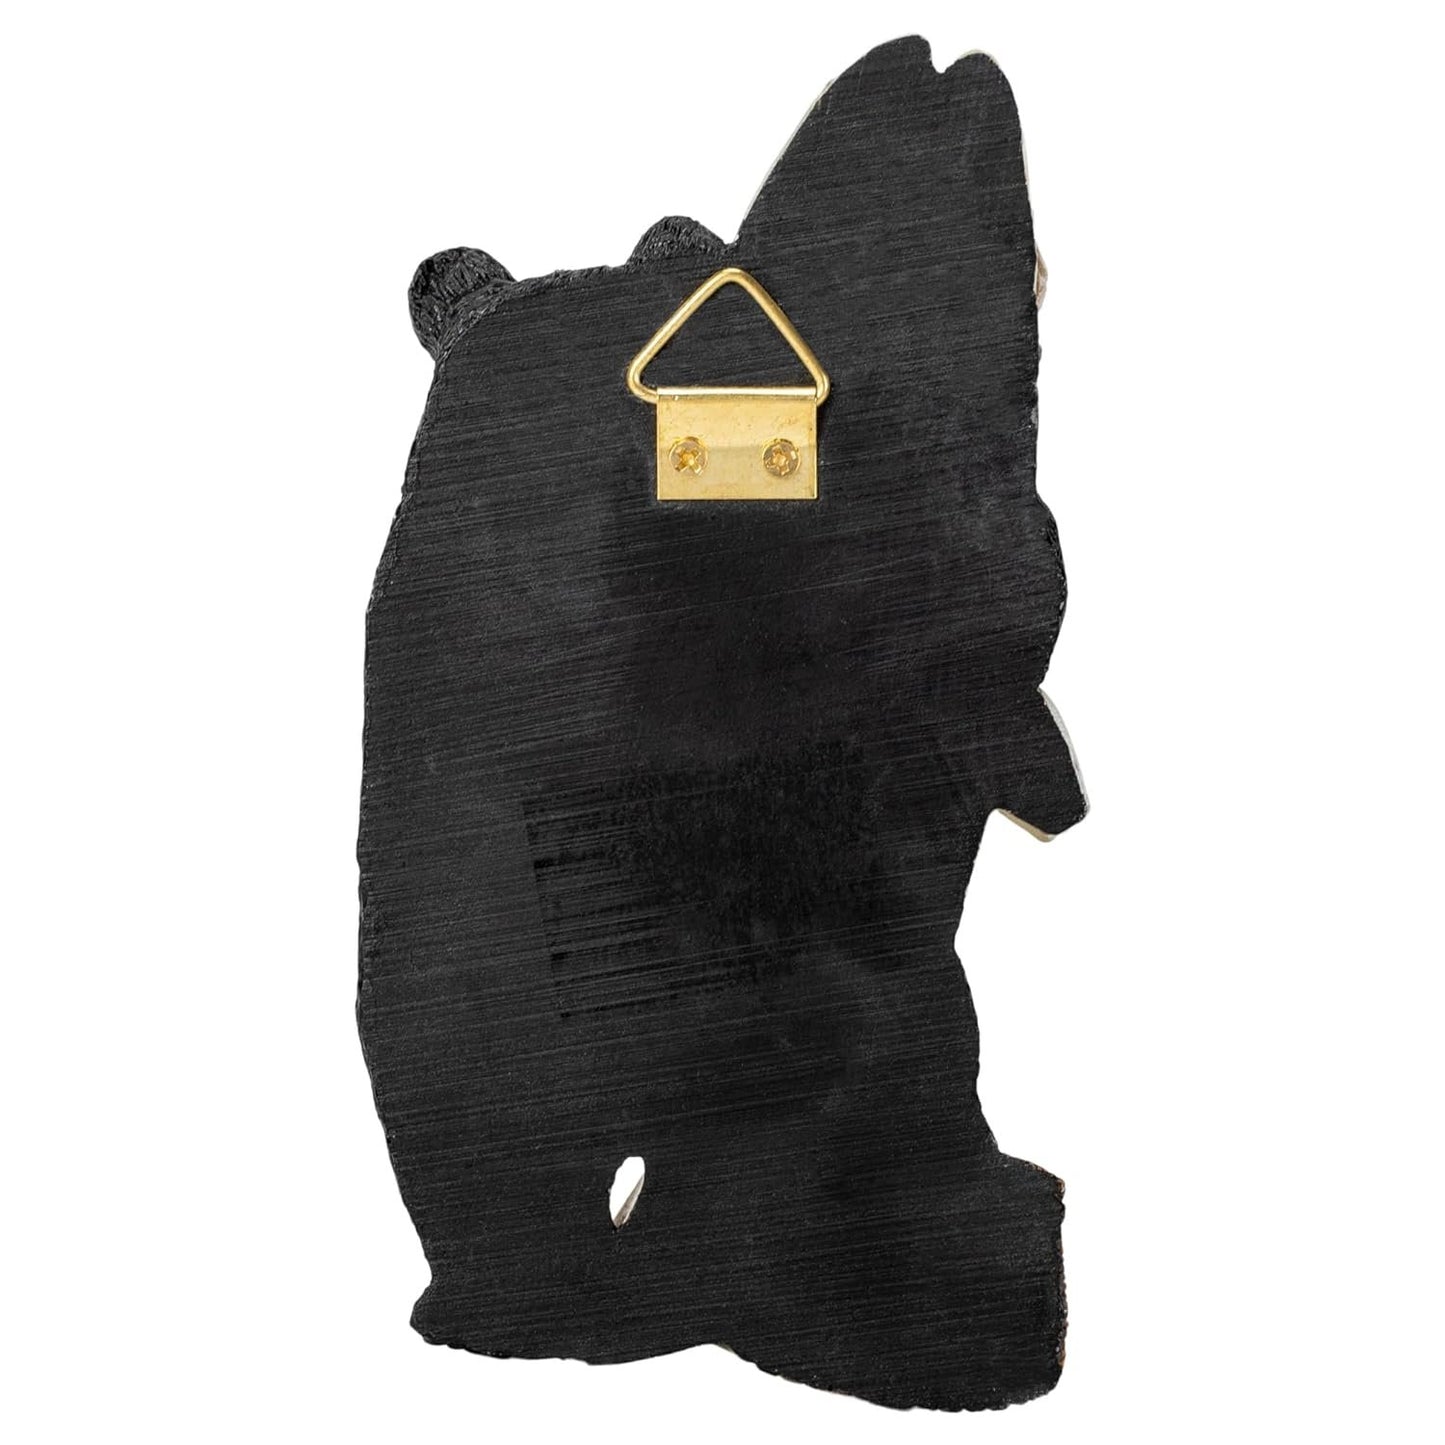 Slifka Sales Co. Chubby Black Bear Holding Fish 6.25 x 3 Resin Indoor or Outdoor Hanging Wall Thermometer, Multi (X2670)